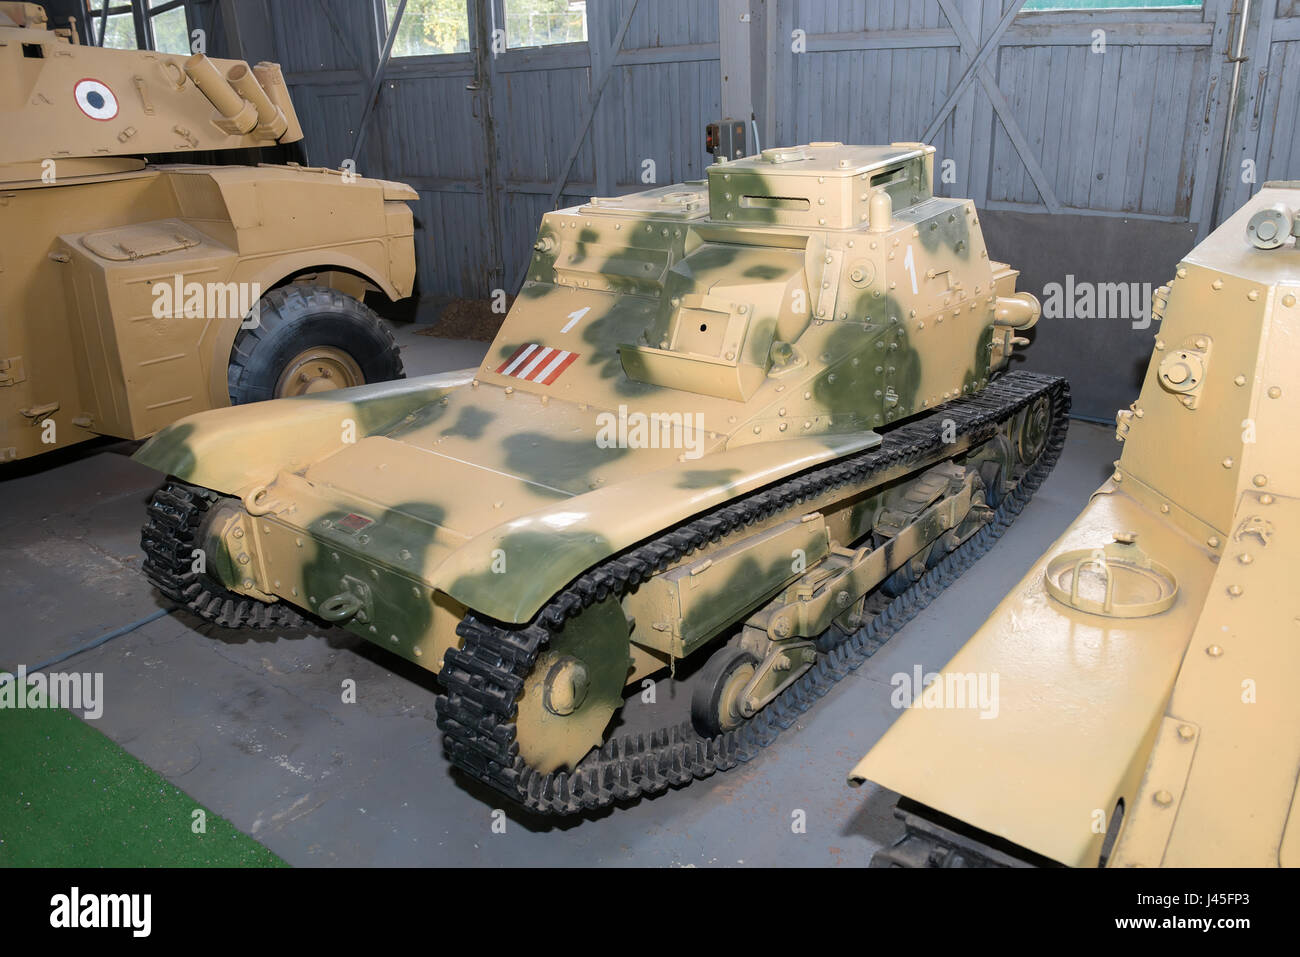 MOSCOW REGION, RUSSIA - SEPTEMBER 01, 2015: tankette Fiat-Ansaldo St-35M armed forces of Italy, in the Museum of armored vehicles, Kubinka near the Mo Stock Photo